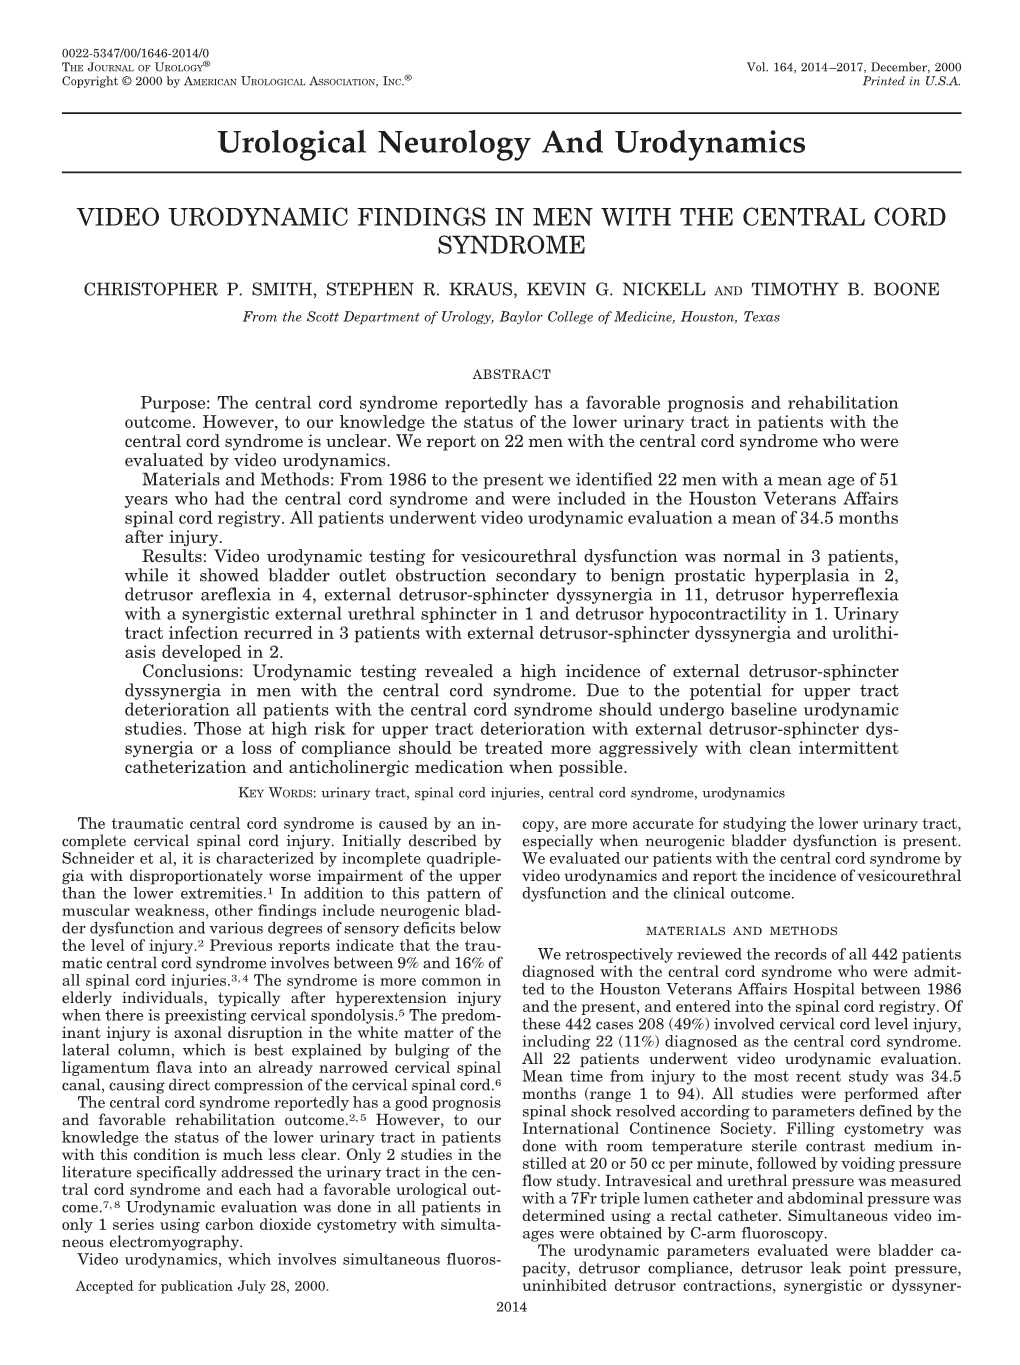 Video Urodynamic Findings in Men with the Central Cord Syndrome